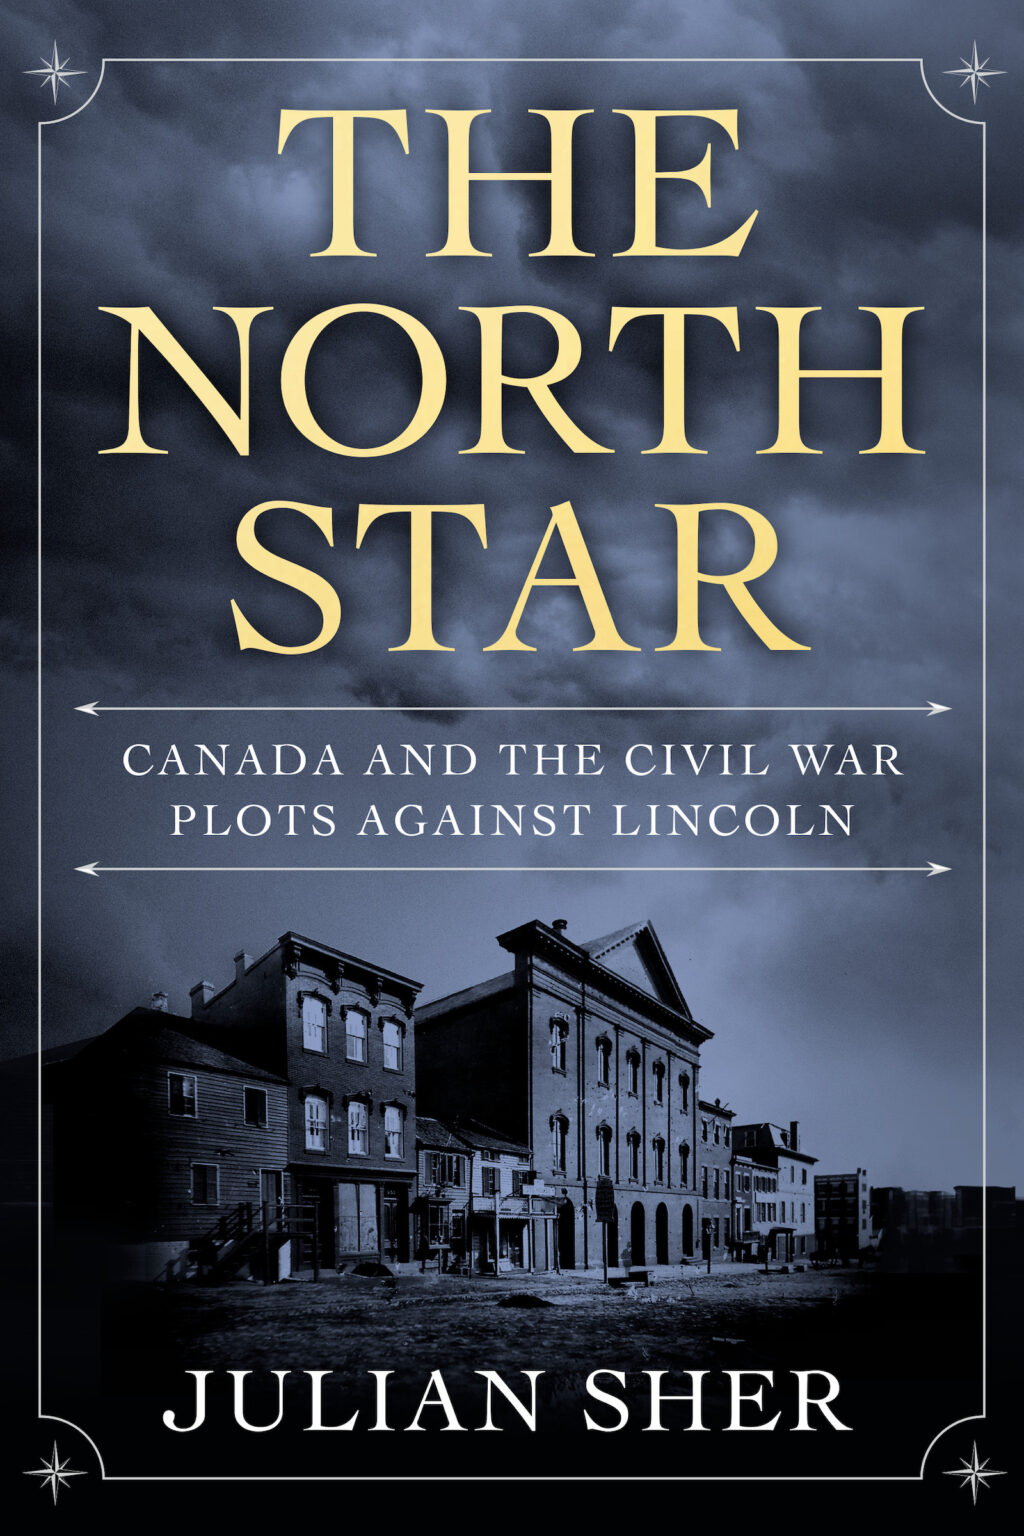 In Julian Sher's 'The North Star', we're taken on a journey through darker aspects of Canada's involvement in the American Civil War. Let's dive in.